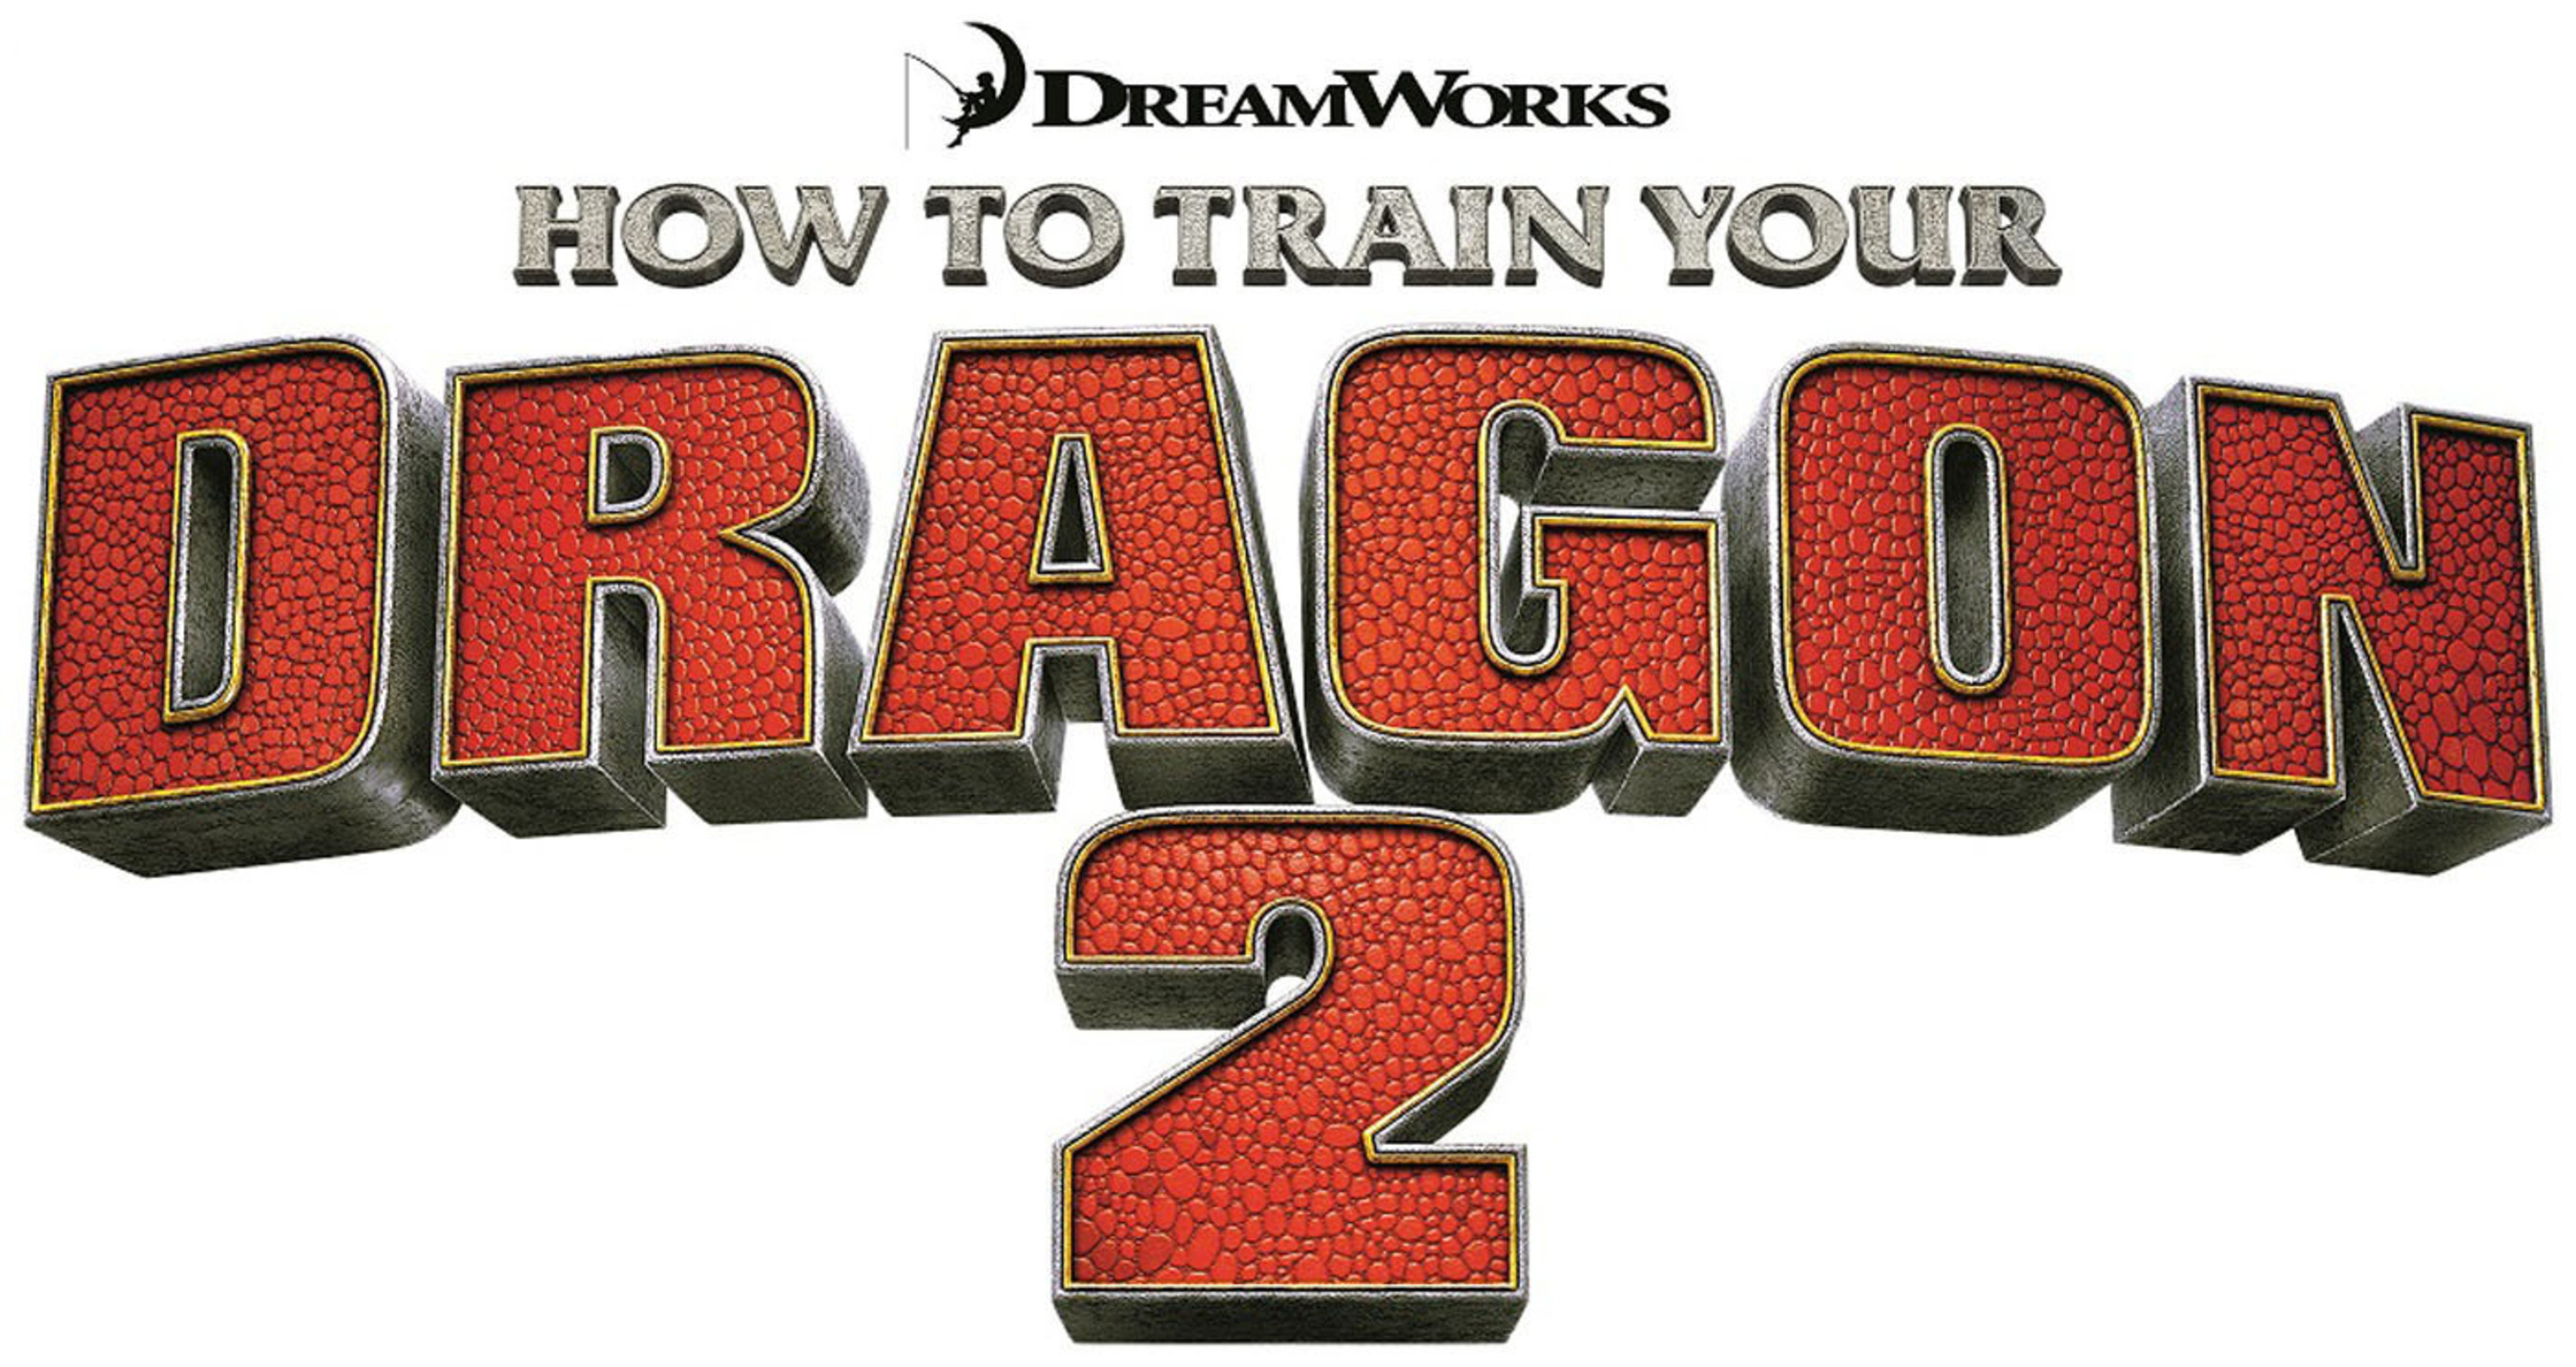 How To Train Your Dragon 2 video game announced by Little Orbit LLC for Xbox 360, Wii, Wii U, PS3 and 3DS. (PRNewsFoto/Little Orbit) (PRNewsFoto/LITTLE ORBIT)